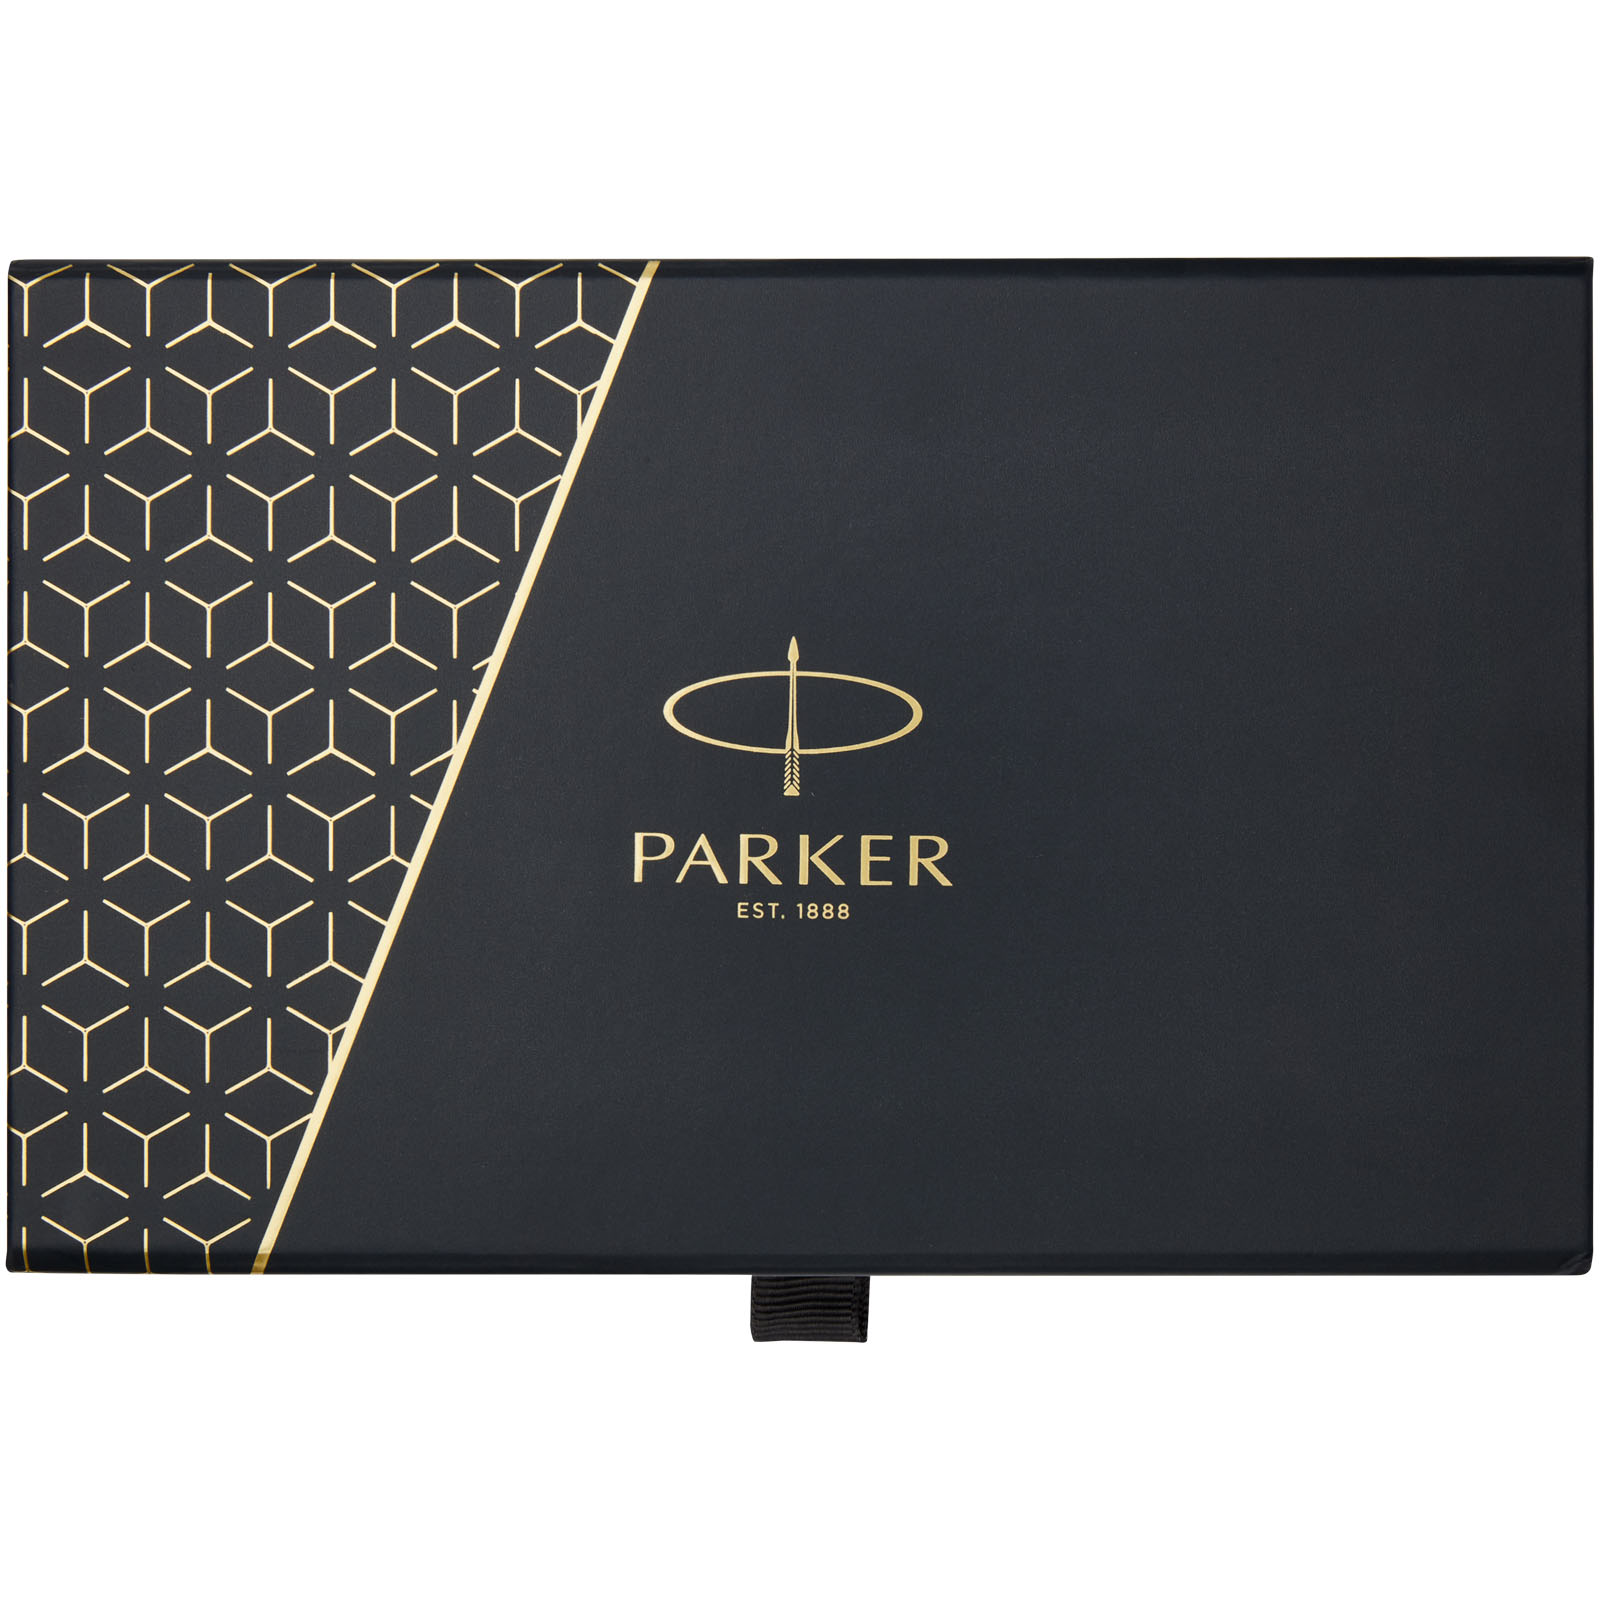 Advertising Gift sets - Parker IM achromatic ballpoint and rollerball pen set with gift box - 1